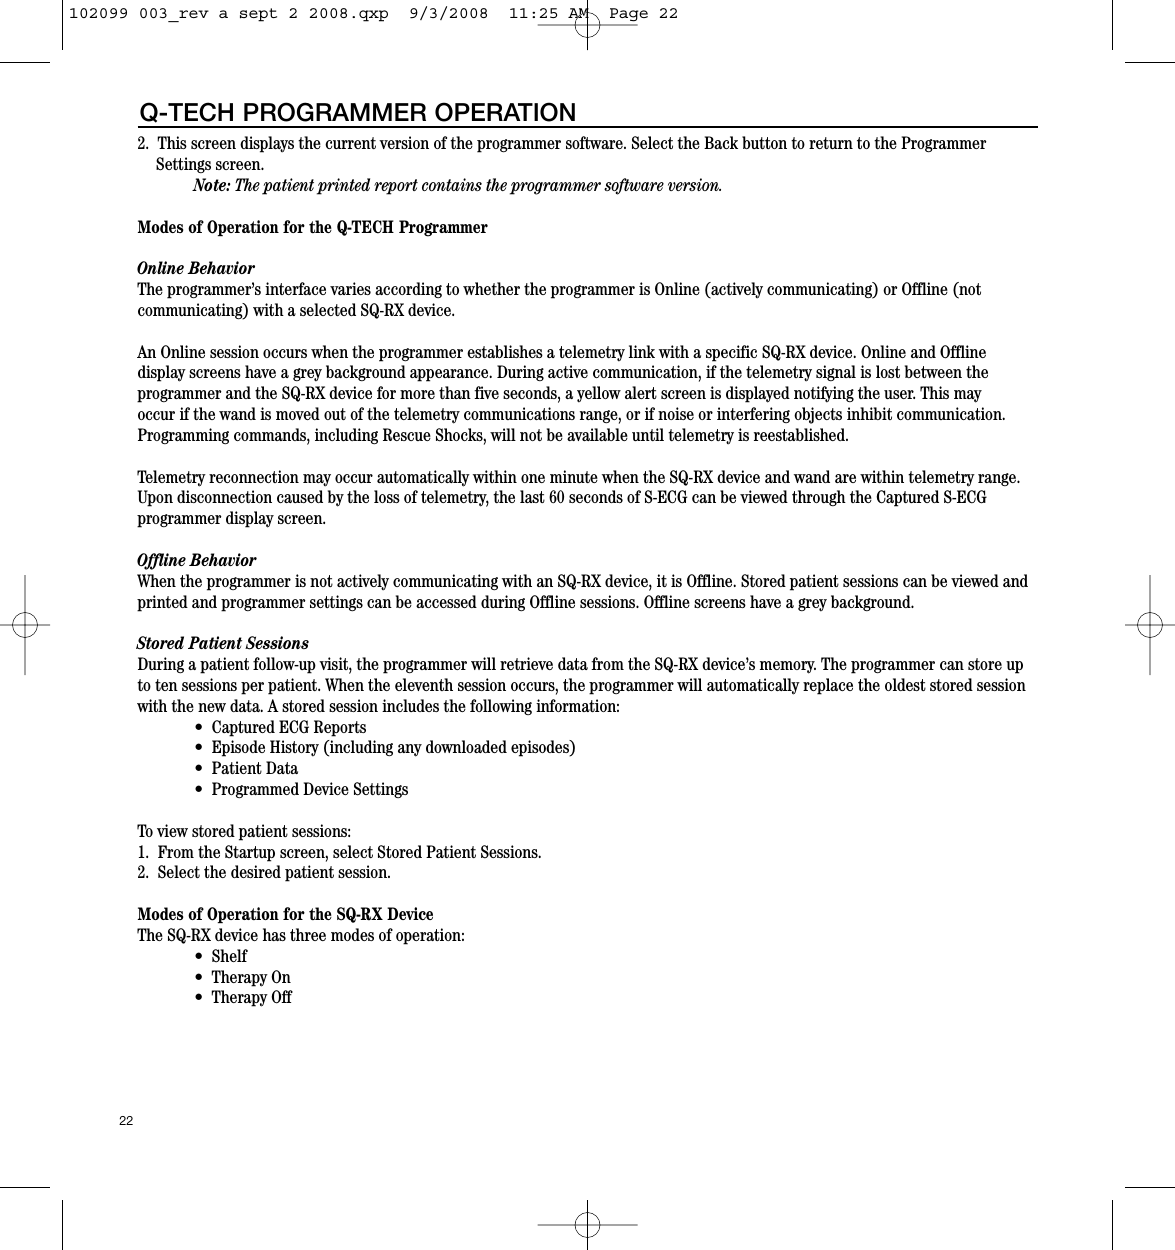 2.  This screen displays the current version of the programmer software. Select the Back button to return to the ProgrammerSettings screen.Note: The patient printed report contains the programmer software version.Modes of Operation for the Q-TECH Programmer Online BehaviorThe programmer’s interface varies according to whether the programmer is Online (actively communicating) or Offline (not communicating) with a selected SQ-RX device.An Online session occurs when the programmer establishes a telemetry link with a specific SQ-RX device. Online and Offline display screens have a grey background appearance. During active communication, if the telemetry signal is lost between the programmer and the SQ-RX device for more than five seconds, a yellow alert screen is displayed notifying the user. This may occur if the wand is moved out of the telemetry communications range, or if noise or interfering objects inhibit communication.Programming commands, including Rescue Shocks, will not be available until telemetry is reestablished.Telemetry reconnection may occur automatically within one minute when the SQ-RX device and wand are within telemetry range.Upon disconnection caused by the loss of telemetry, the last 60 seconds of S-ECG can be viewed through the Captured S-ECG programmer display screen. Offline BehaviorWhen the programmer is not actively communicating with an SQ-RX device, it is Offline. Stored patient sessions can be viewed andprinted and programmer settings can be accessed during Offline sessions. Offline screens have a grey background.Stored Patient Sessions During a patient follow-up visit, the programmer will retrieve data from the SQ-RX device’s memory. The programmer can store upto ten sessions per patient. When the eleventh session occurs, the programmer will automatically replace the oldest stored sessionwith the new data. A stored session includes the following information:•  Captured ECG Reports•  Episode History (including any downloaded episodes)•  Patient Data•  Programmed Device SettingsTo view stored patient sessions:1.  From the Startup screen, select Stored Patient Sessions.2.  Select the desired patient session.Modes of Operation for the SQ-RX DeviceThe SQ-RX device has three modes of operation:•  Shelf •  Therapy On•  Therapy Off22Q-TECH PROGRAMMER OPERATION102099 003_rev a sept 2 2008.qxp  9/3/2008  11:25 AM  Page 22